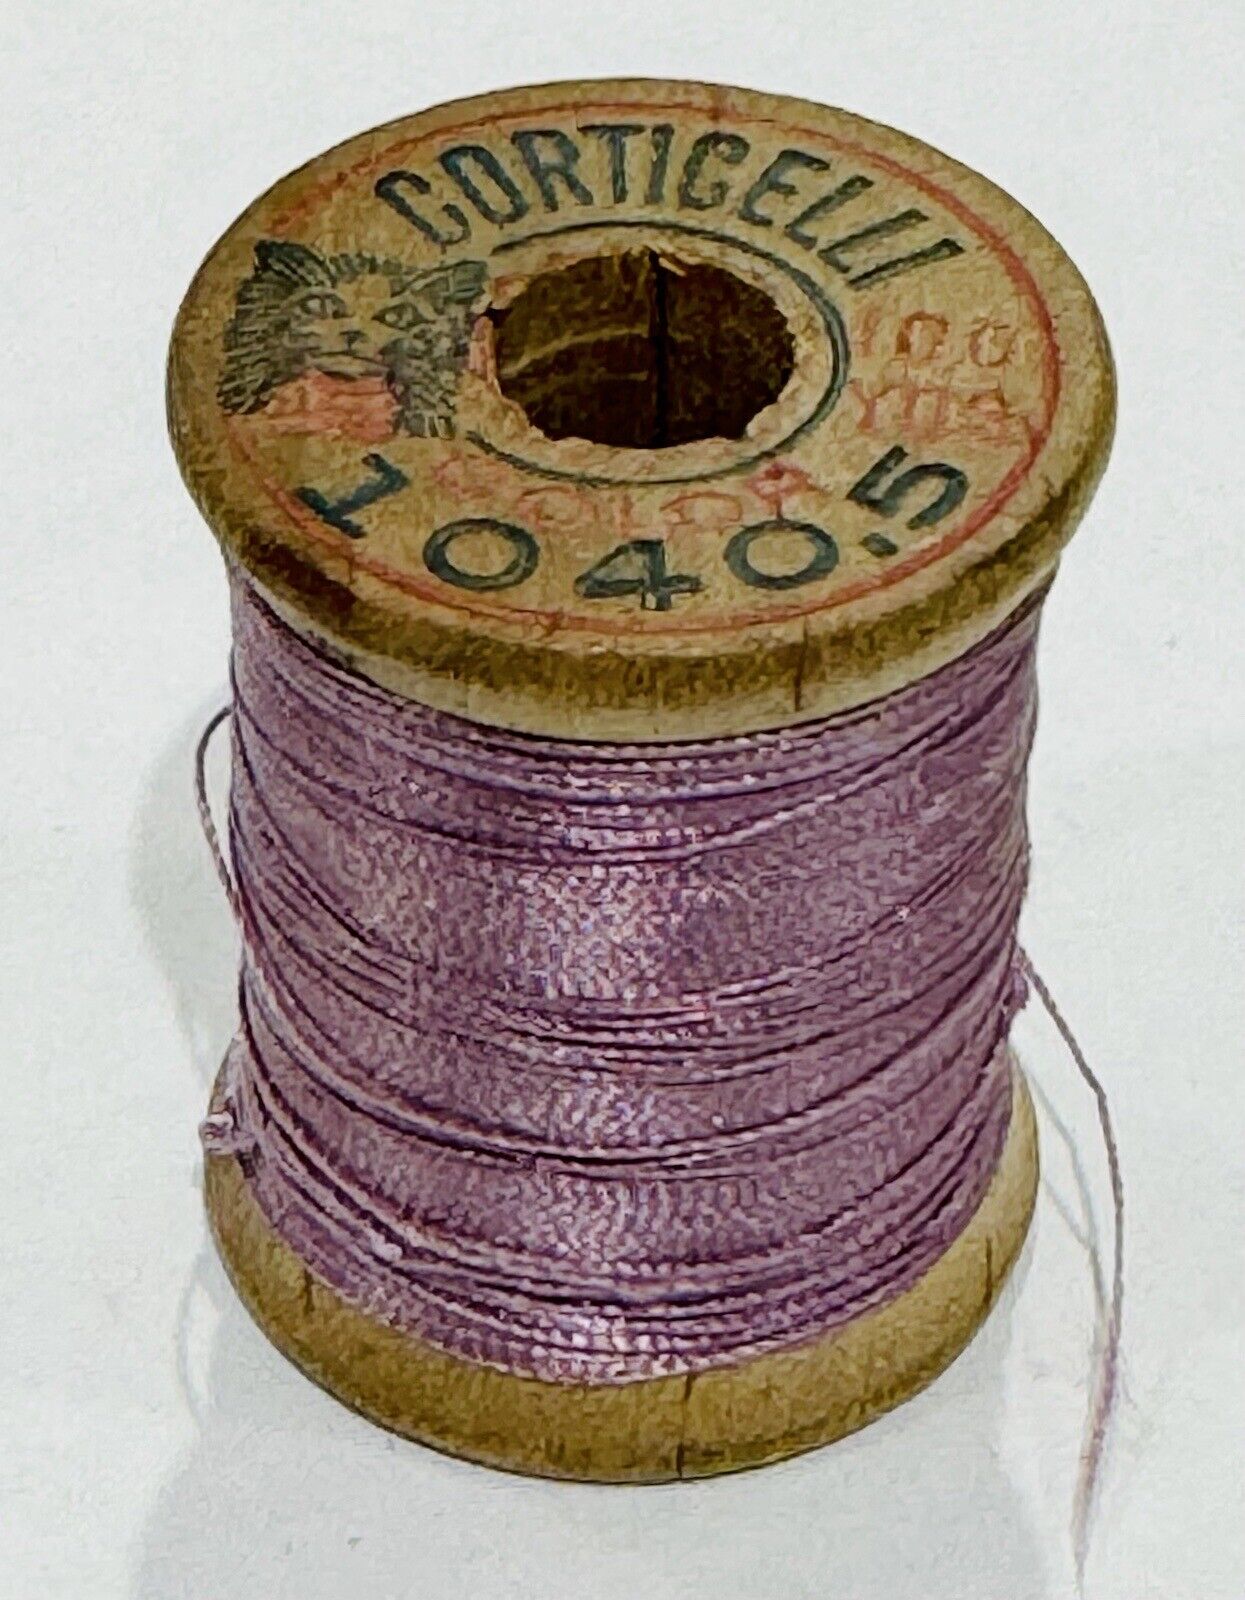 VINTAGE Silk Thread CORTICELLI CAT Lilac Purple Fly Fishing Tying Sewing 1040.5